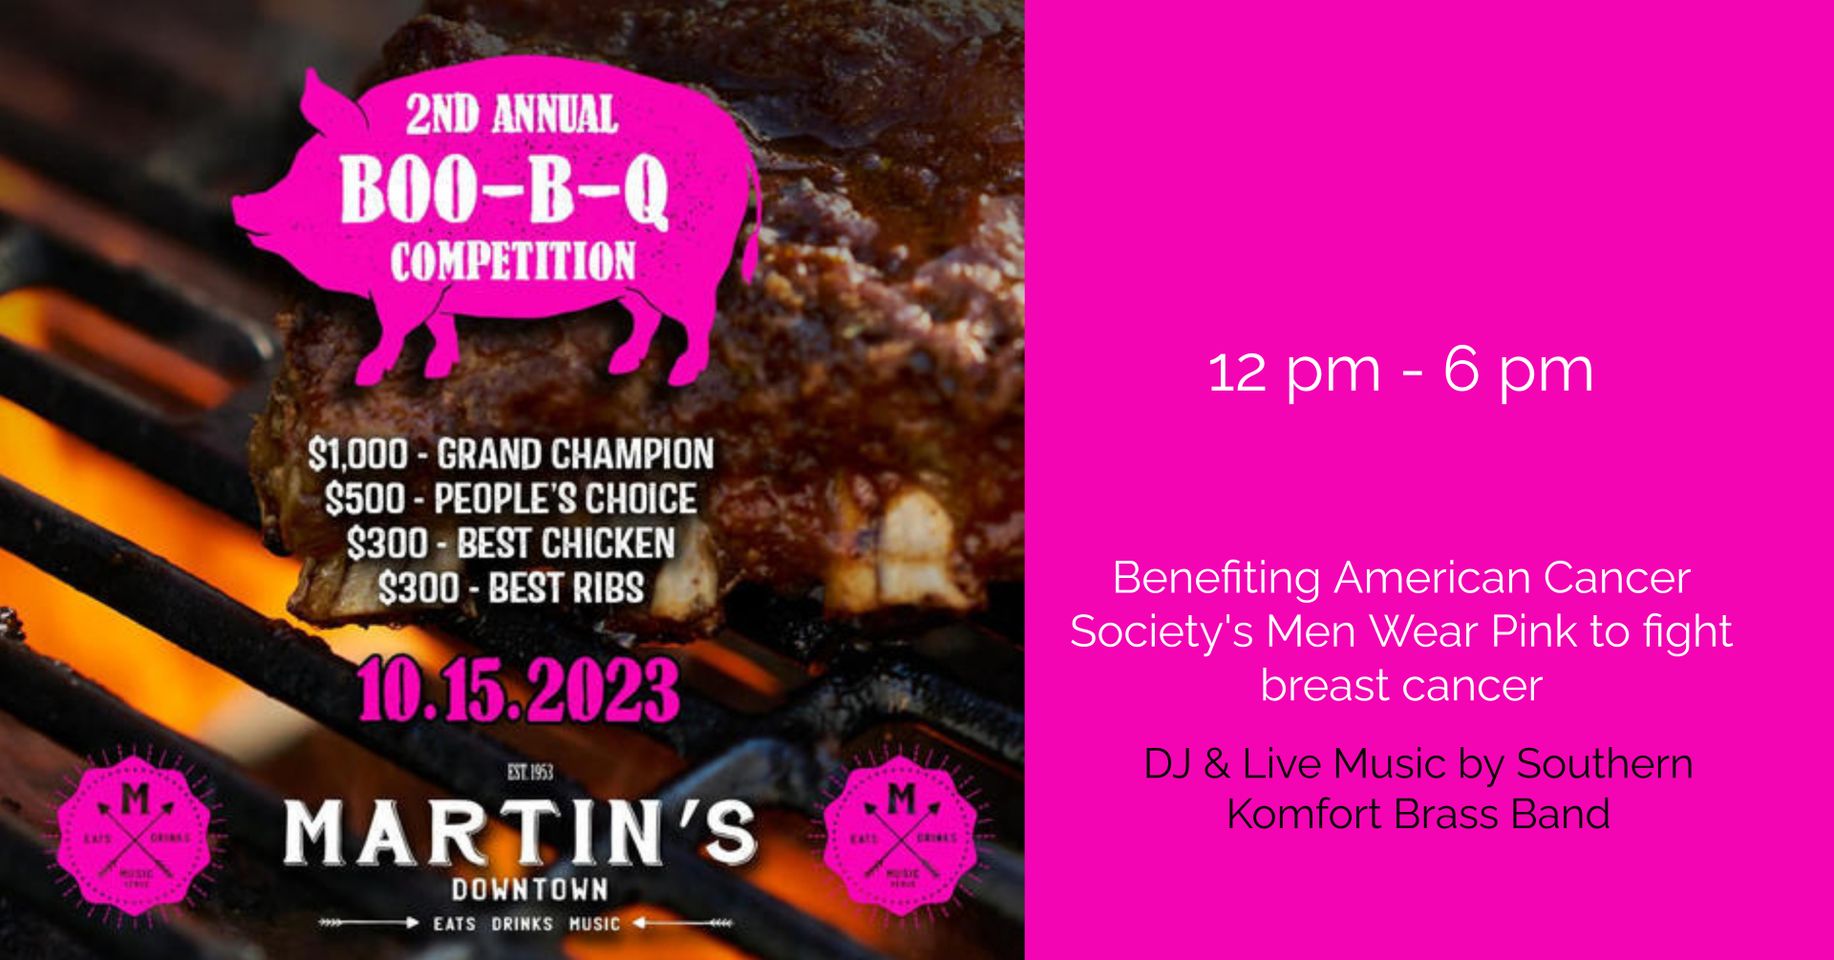 Martin’s Downtown’s 2nd Annual Boo-B-Q Competition!